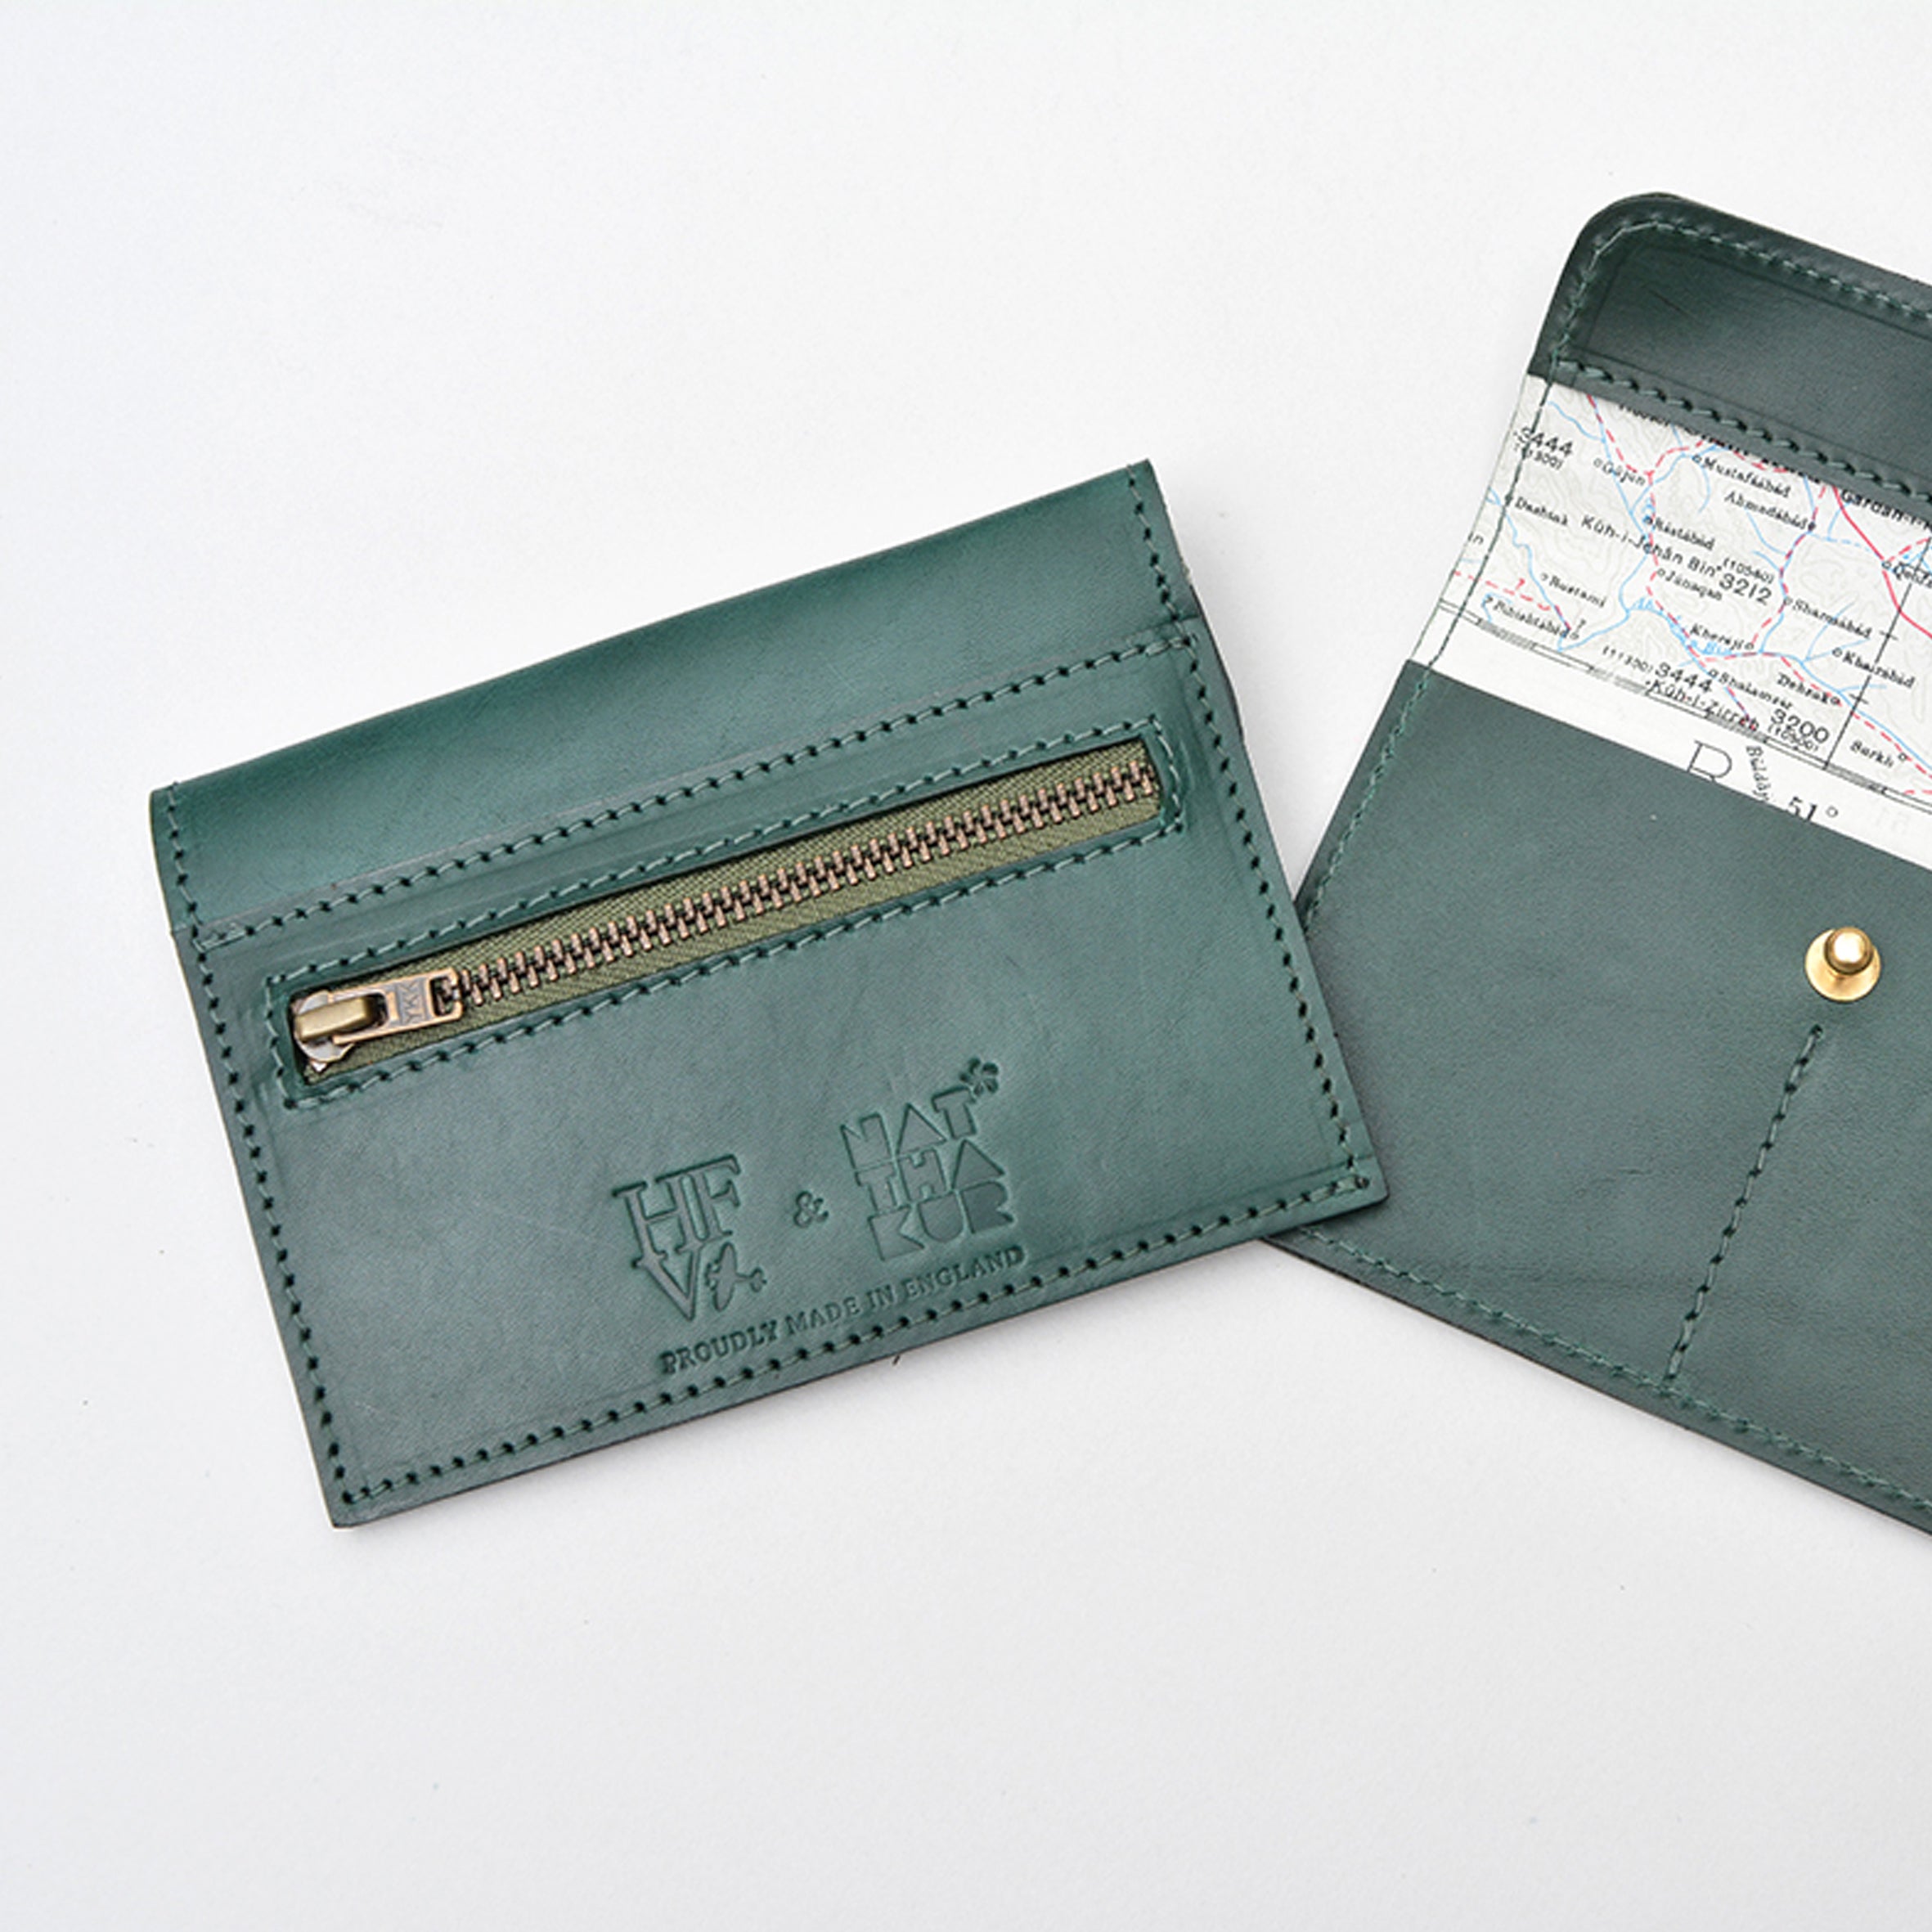 Escape map cardholders and wallets